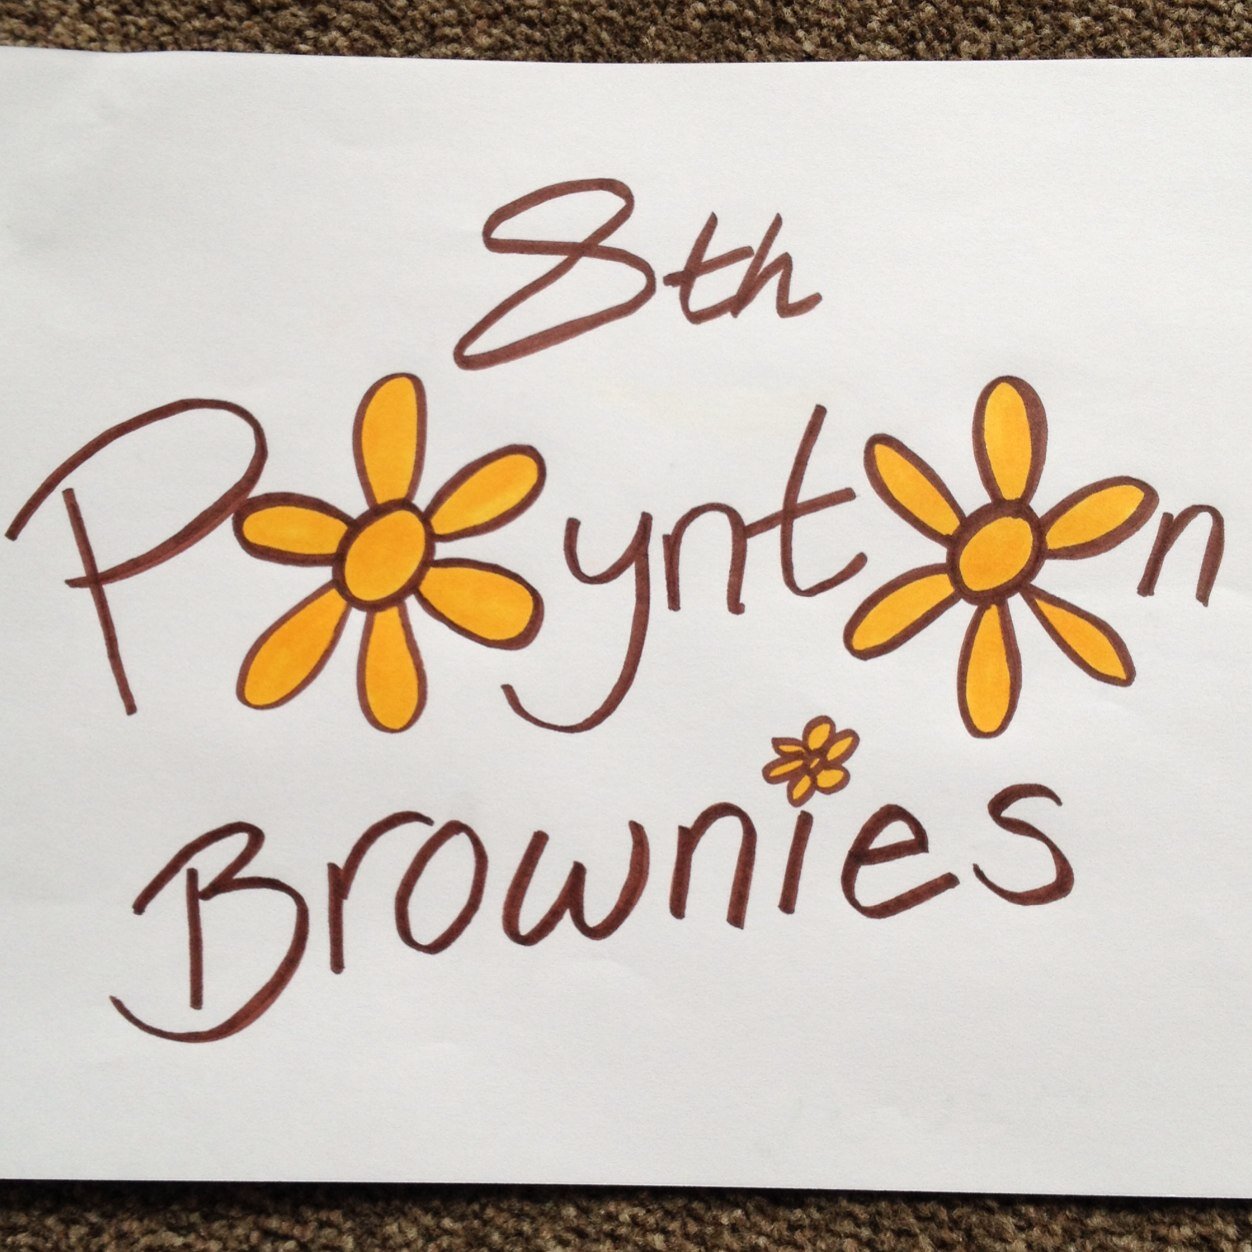 We are 8th Poynton Brownies. Our motto is always to SMILE! Having fun, learning new things, and, of course, lending a hand!